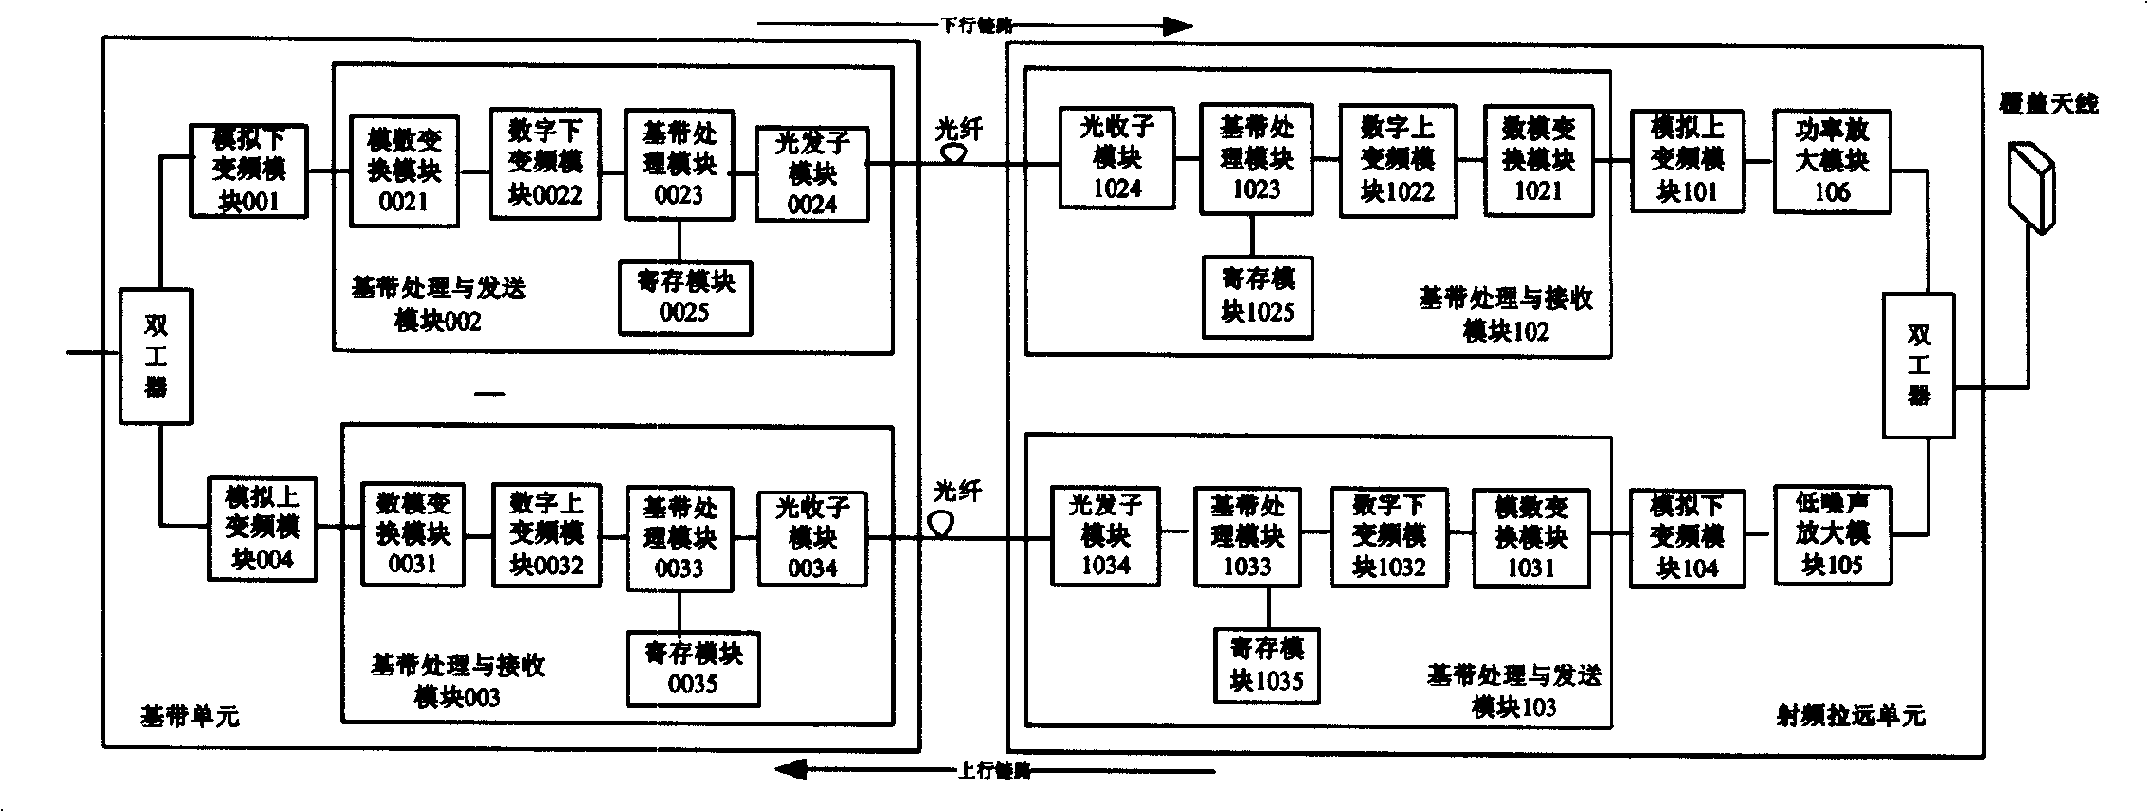 Self-cure monitoring method and device of digital remote radio system